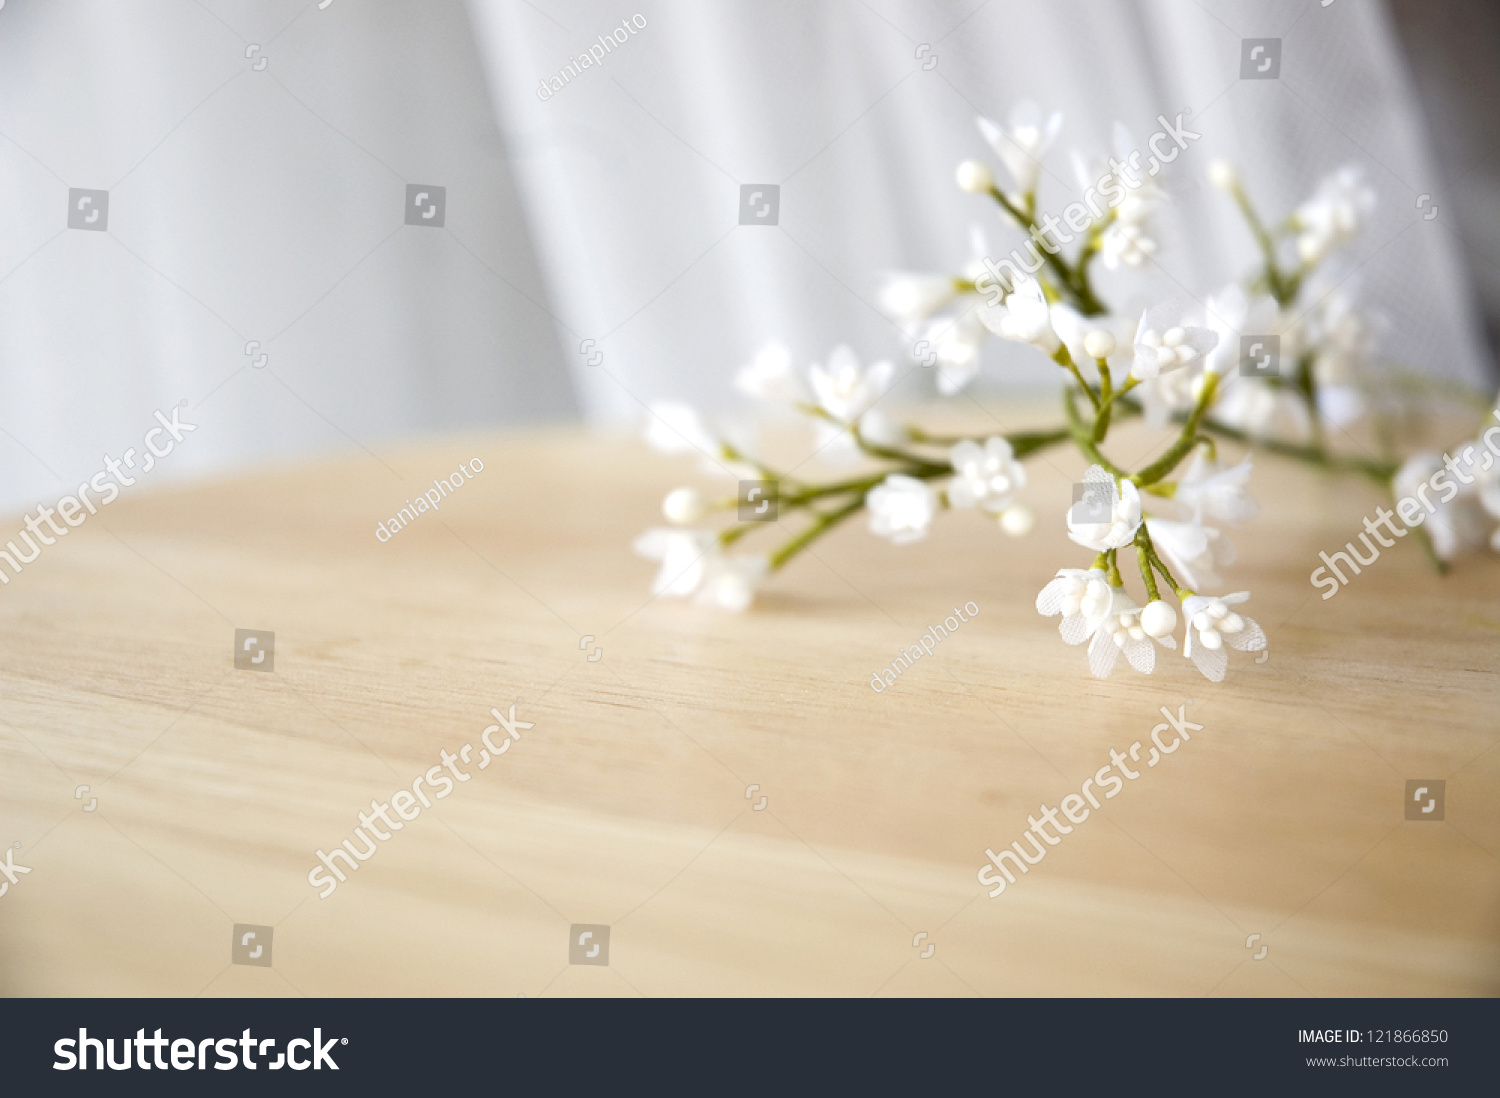 close up white artificial flowers put on table #121866850